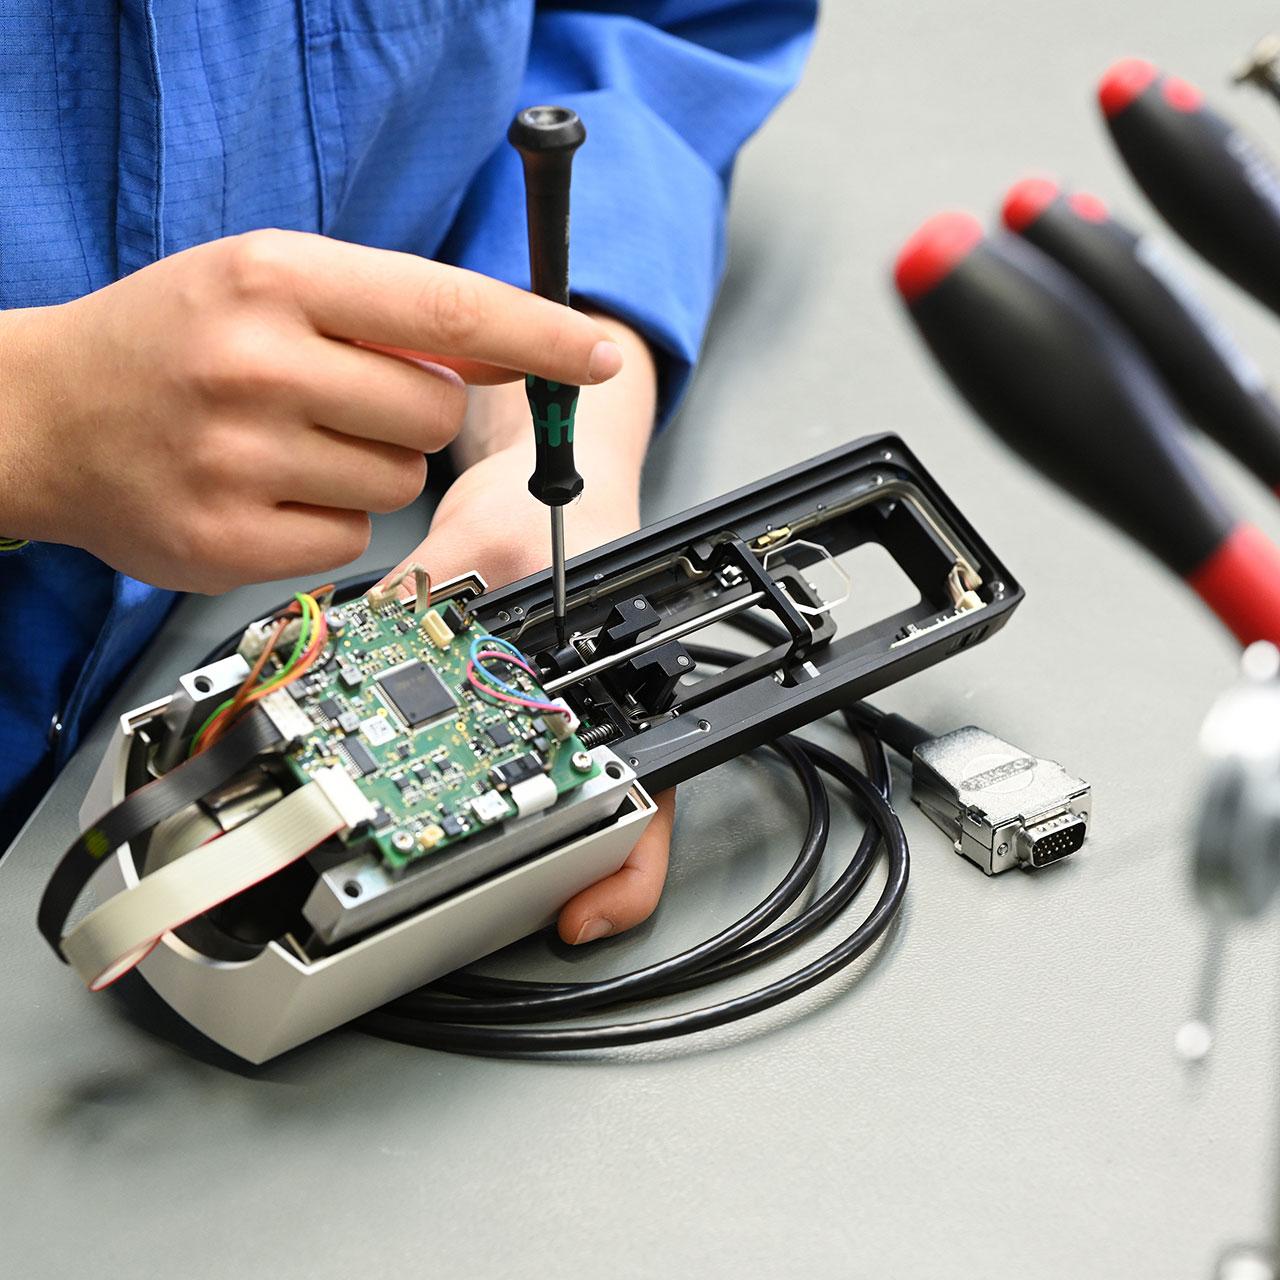 Mechanic adjusts an assembly with printed circuit board